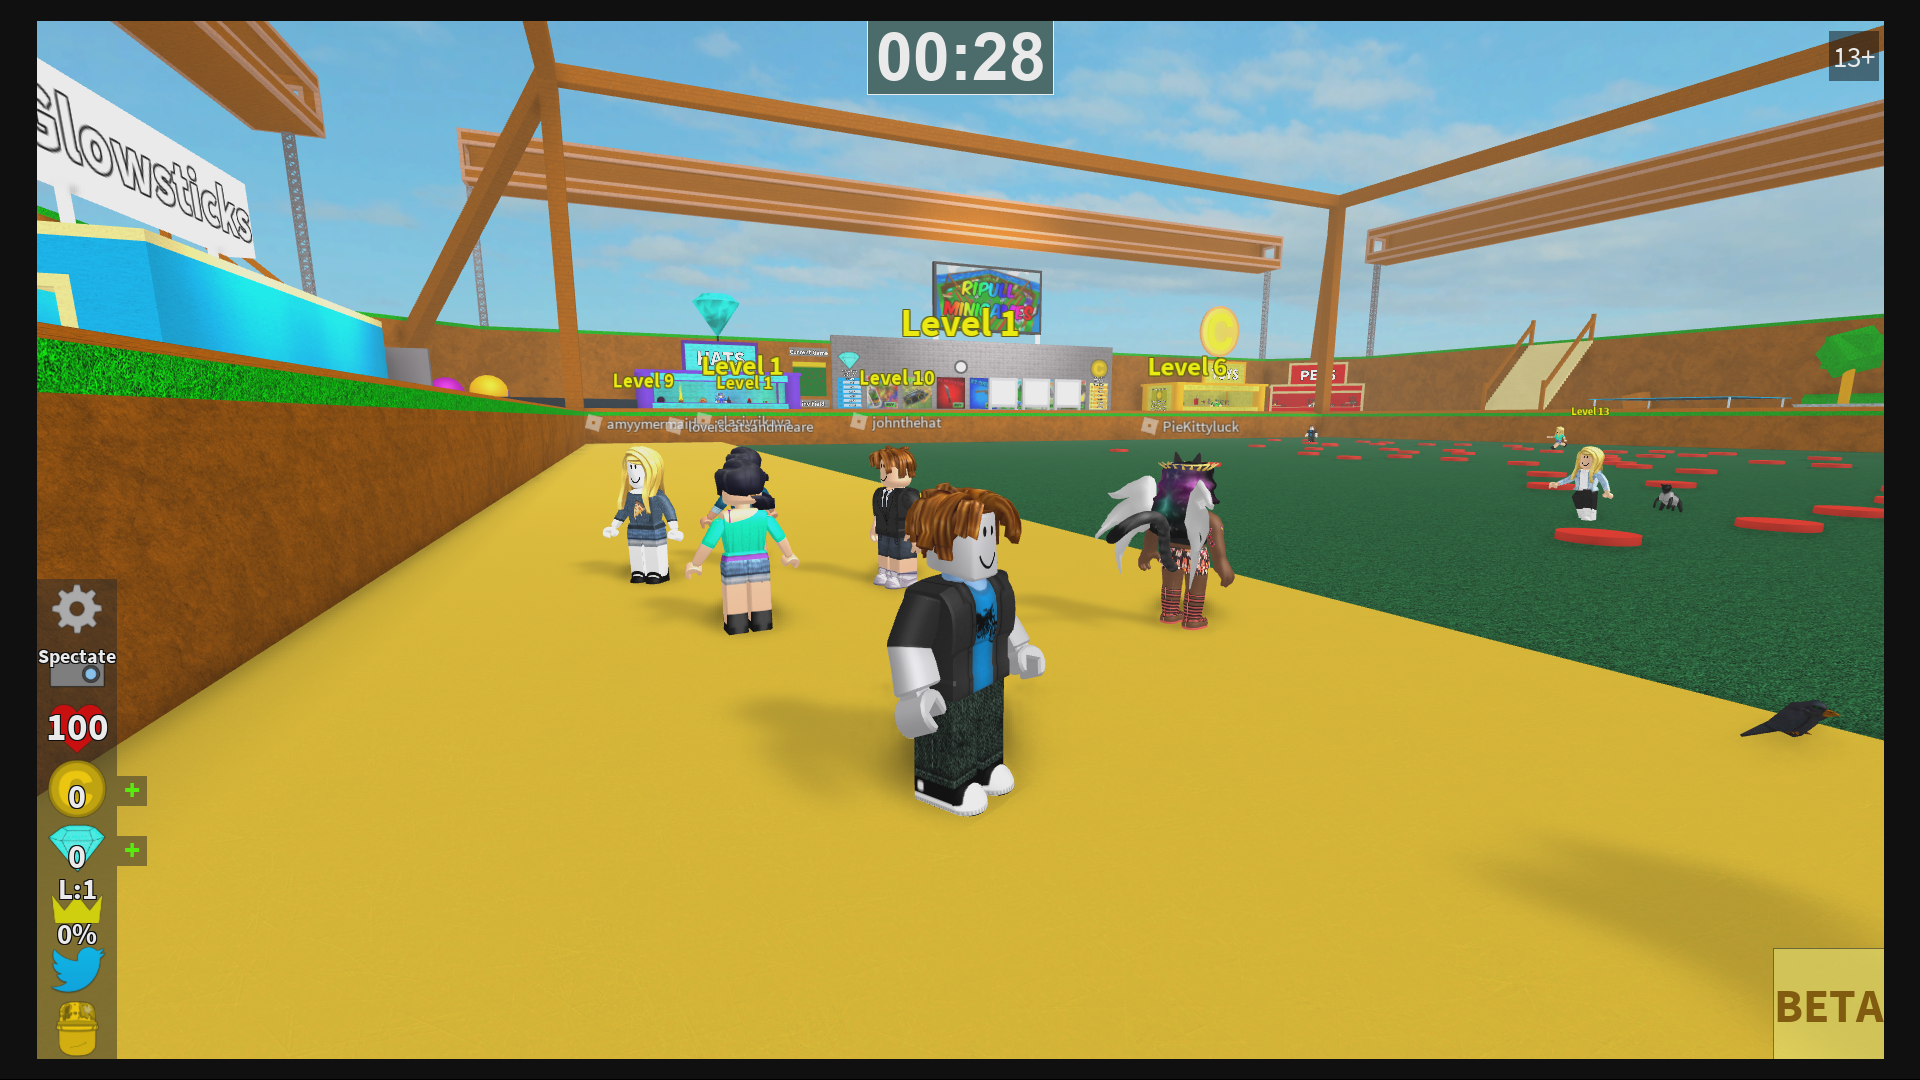 How To Play Roblox On Pc With Xbox